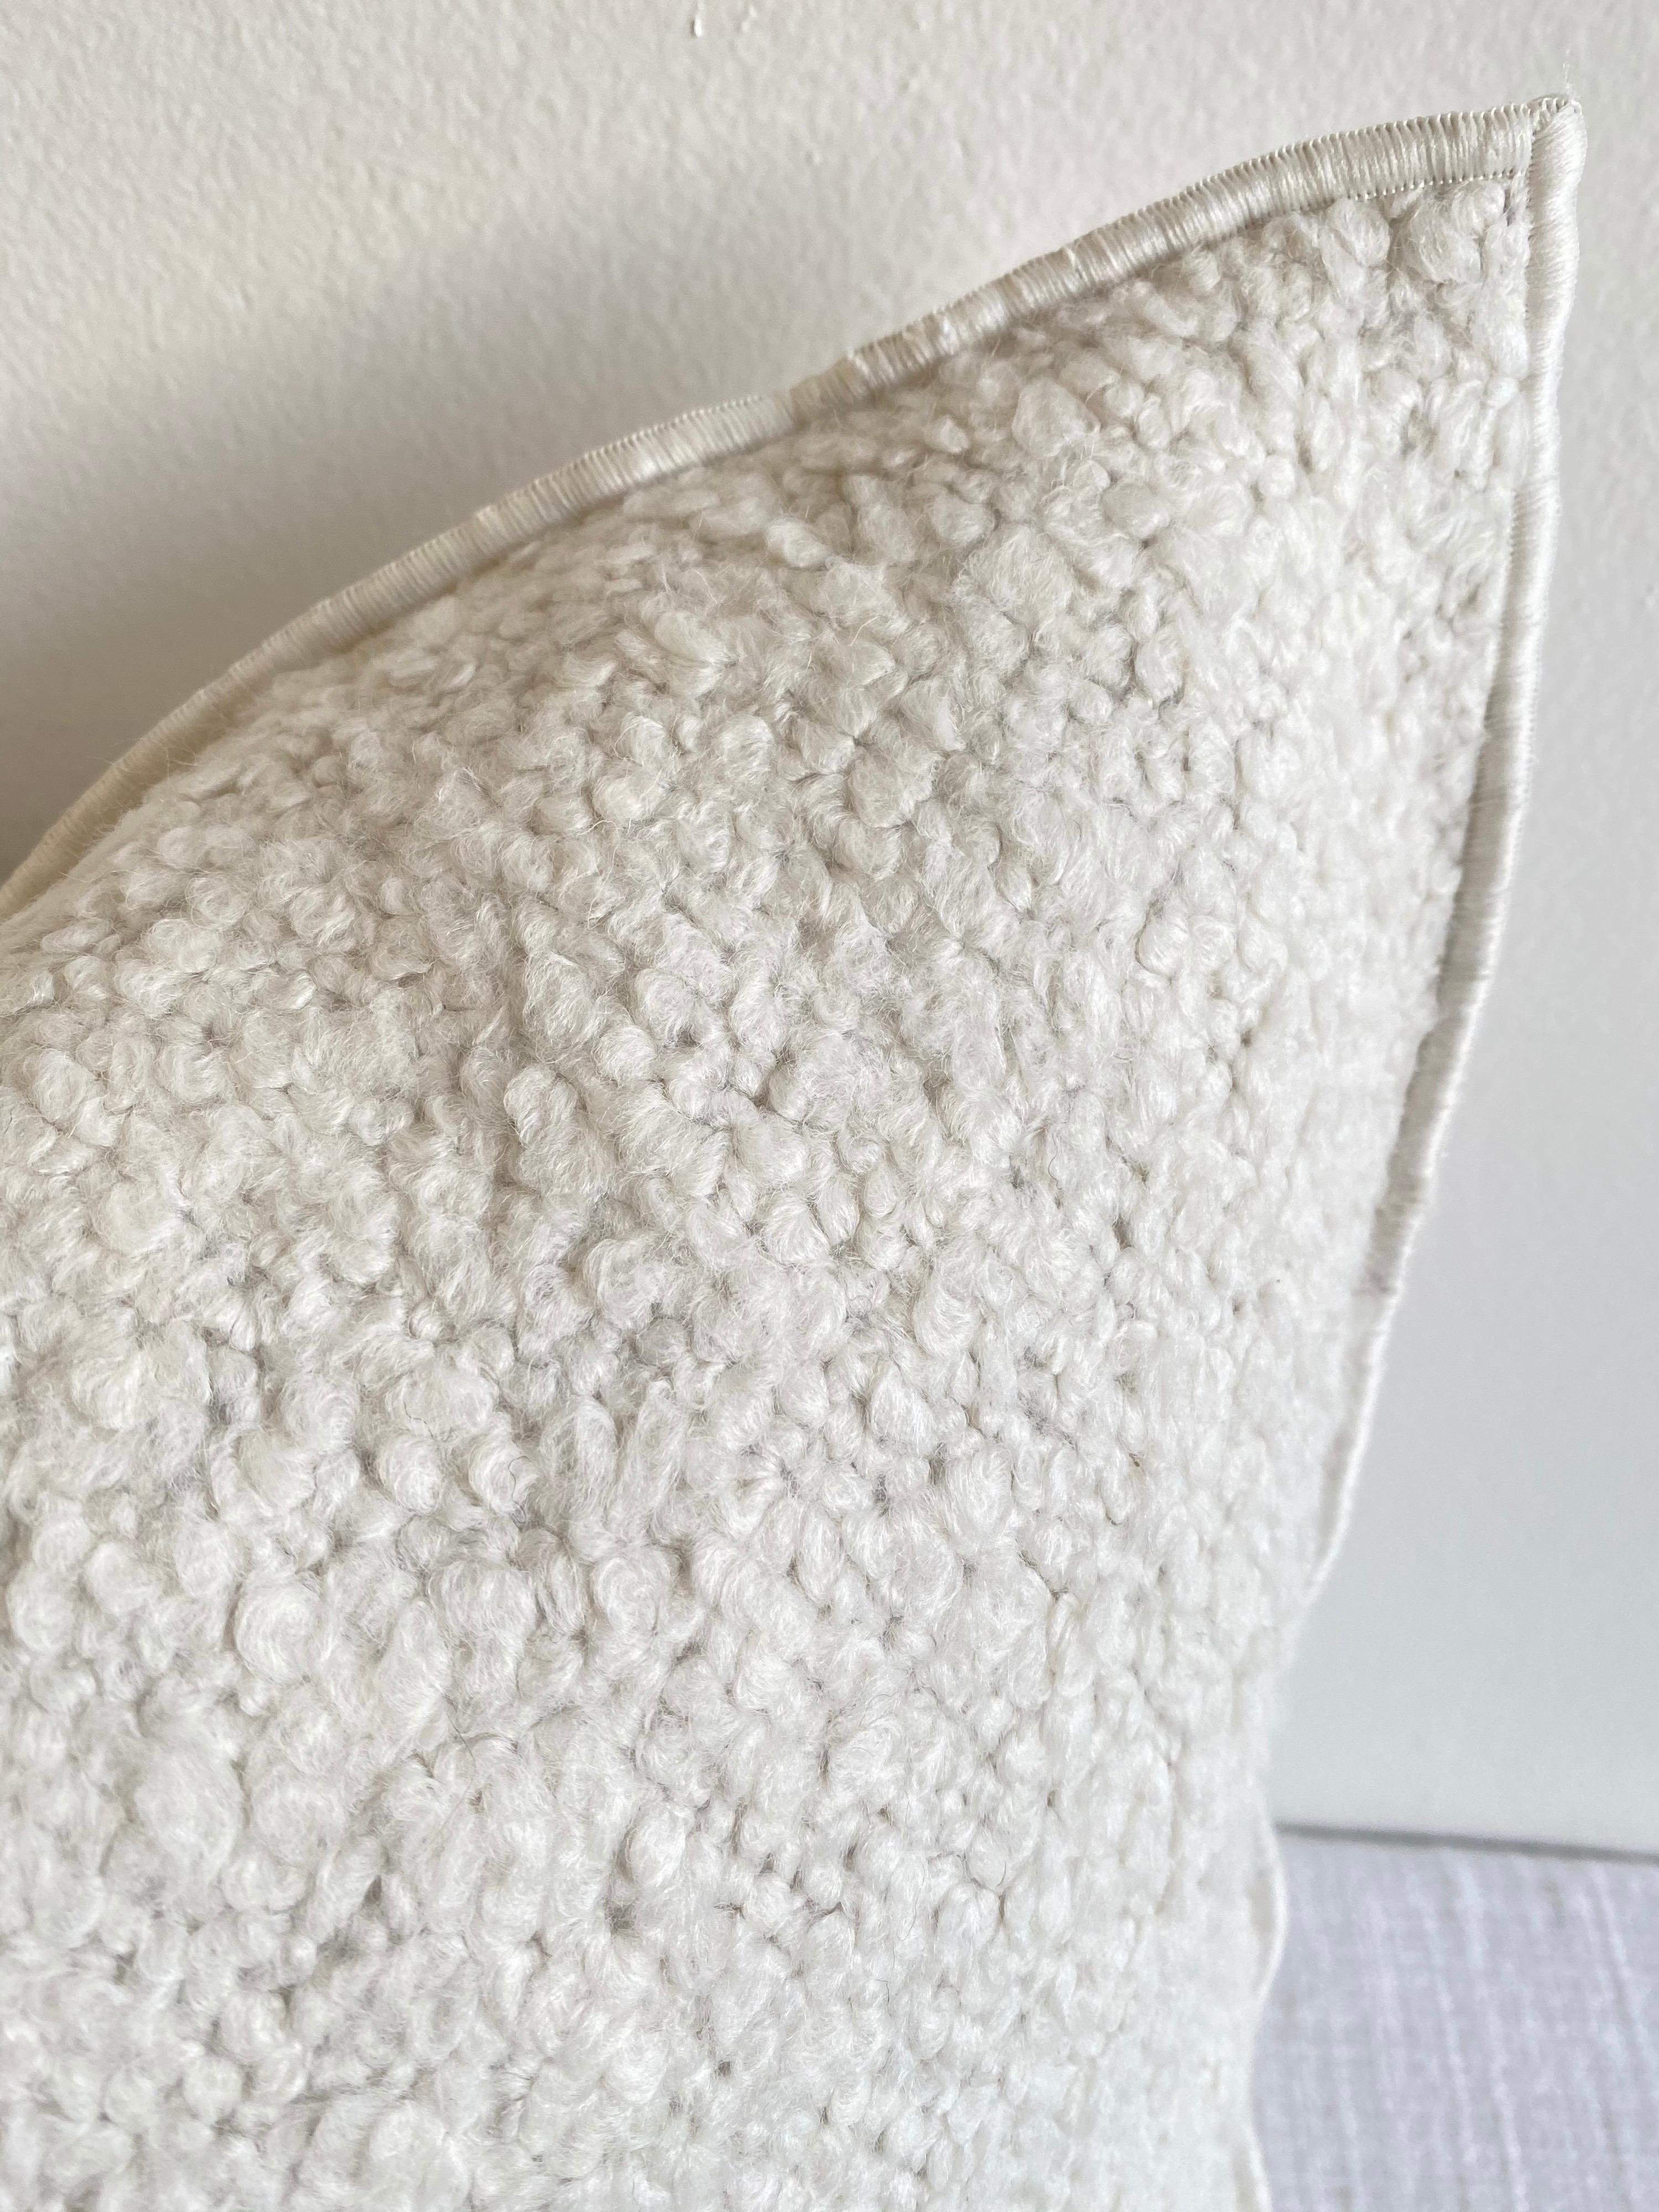 Custom wool and linen blend accent pillow with down insert Color: Toile Yeti / Blanc A creamy white colored nubby boucle style pillow with a stitched edge, metal zipper closure. Our pillows are constructed with vintage one of a kind textiles from